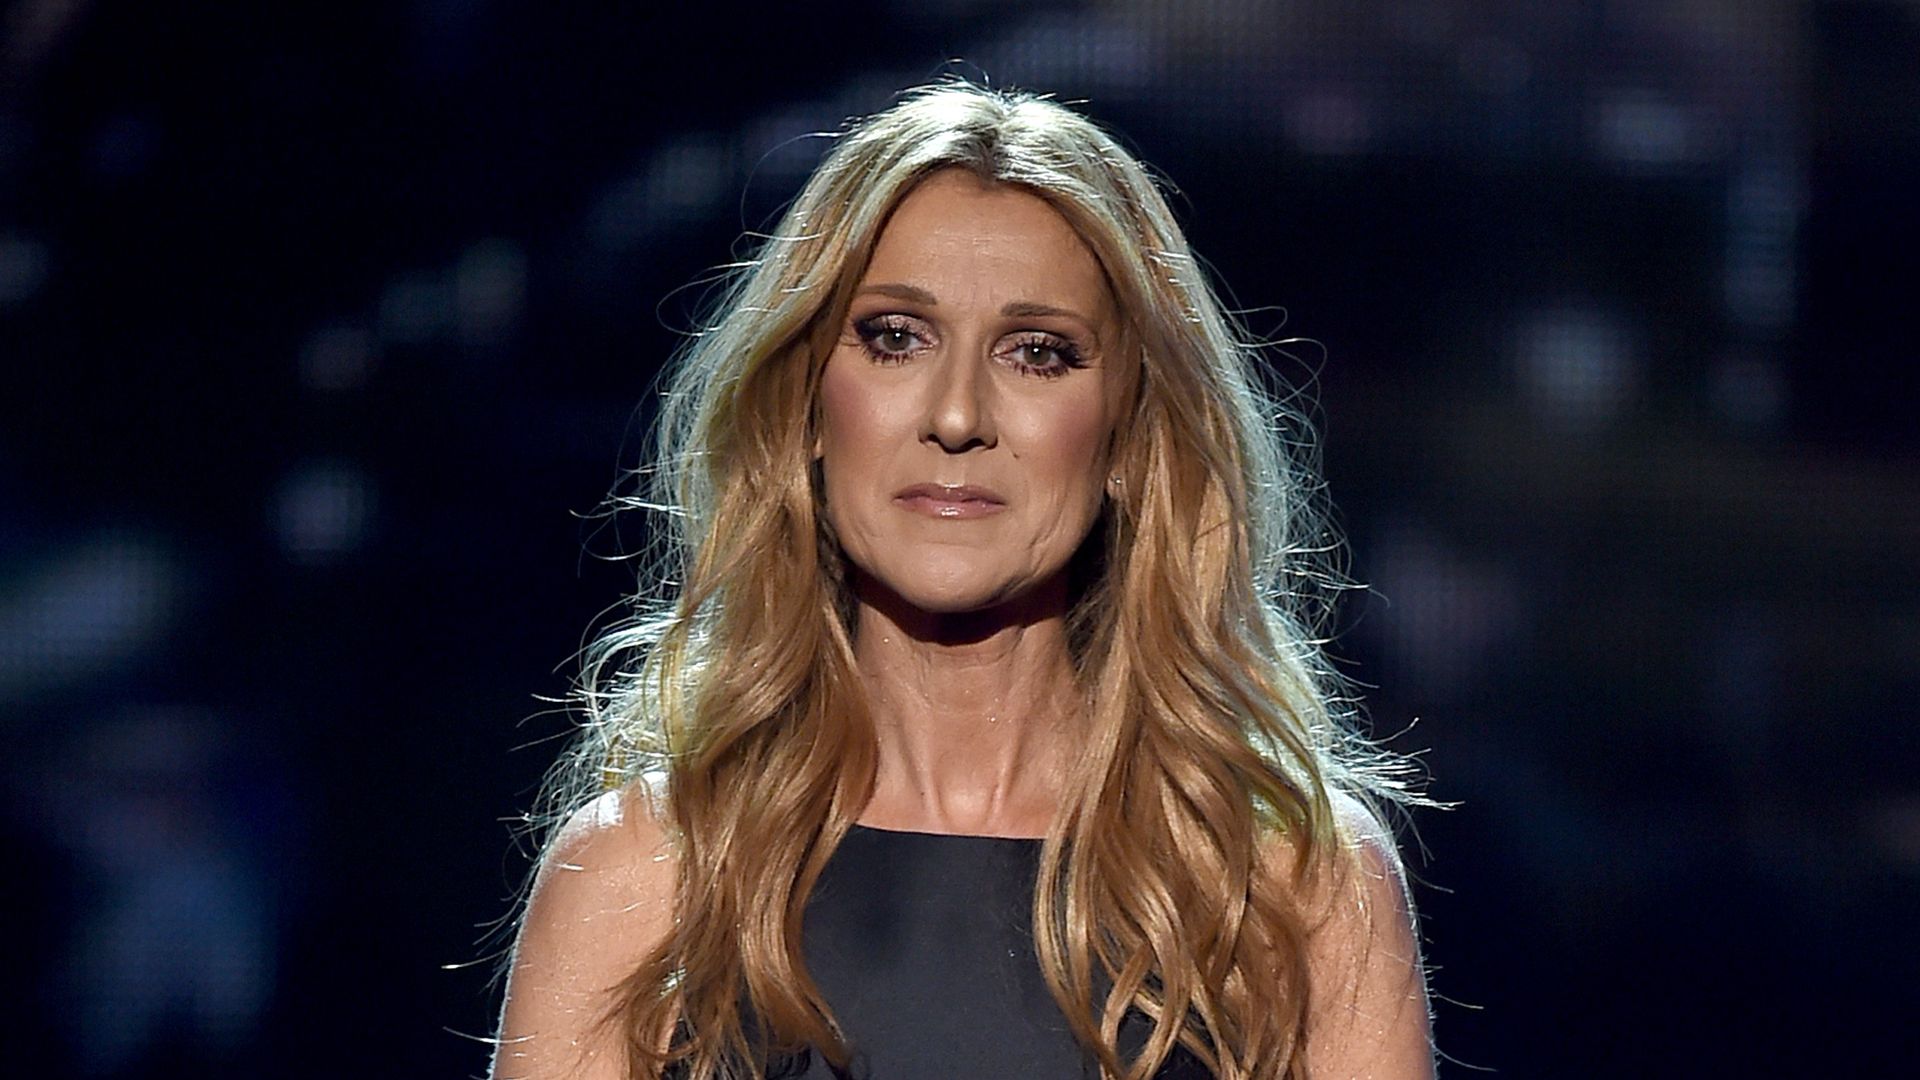 Celine Dion left heartbroken by tragic loss, shares rare personal message: 'Forever in our hearts'